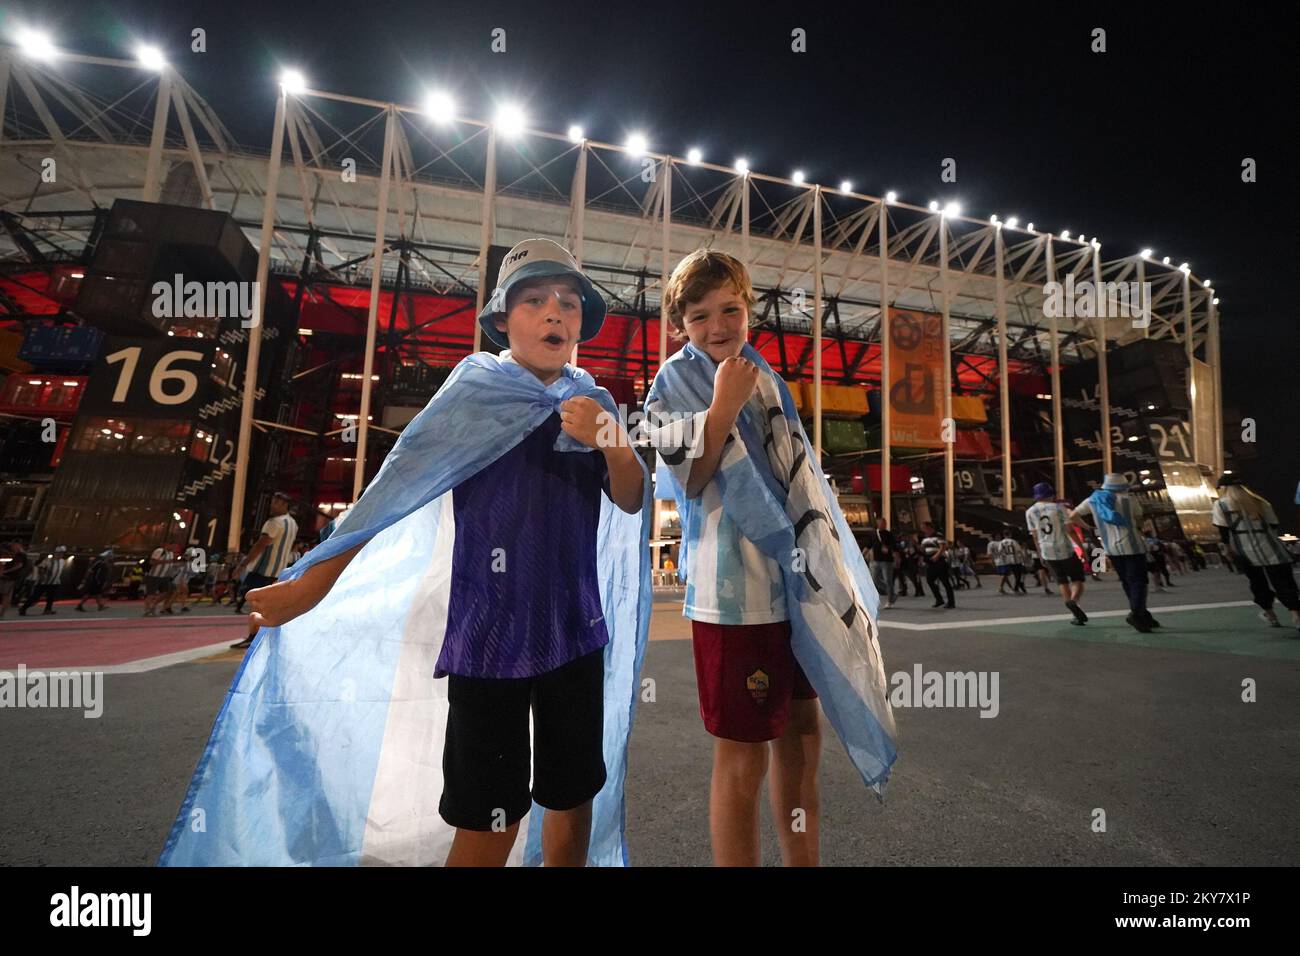 DOHA, QATAR - NOVEMBER 30: Supporters of Argentina pose for a photo before the FIFA World Cup Qatar 2022 group C match between Argentina and Poland at Stadium 974 on November 30, 2022 in Doha, Qatar. (Photo by Florencia Tan Jun/PxImages) Credit: Px Images/Alamy Live News Stock Photo